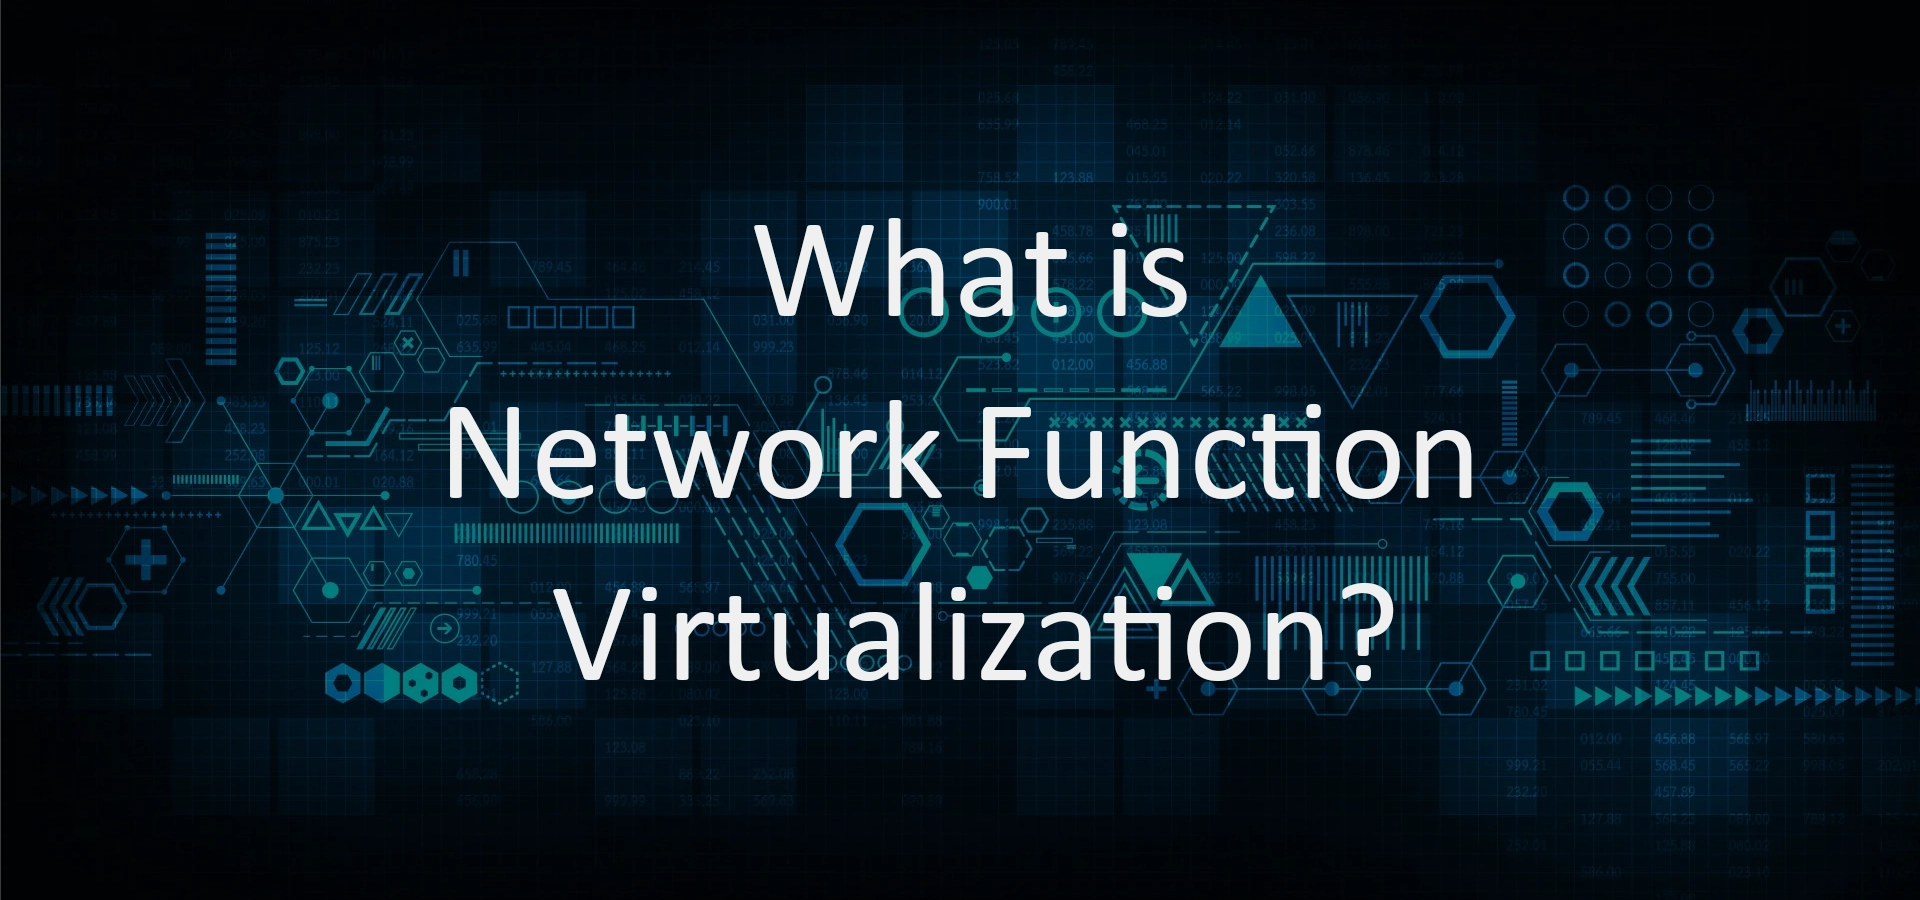 What is Network Function Virtualization?